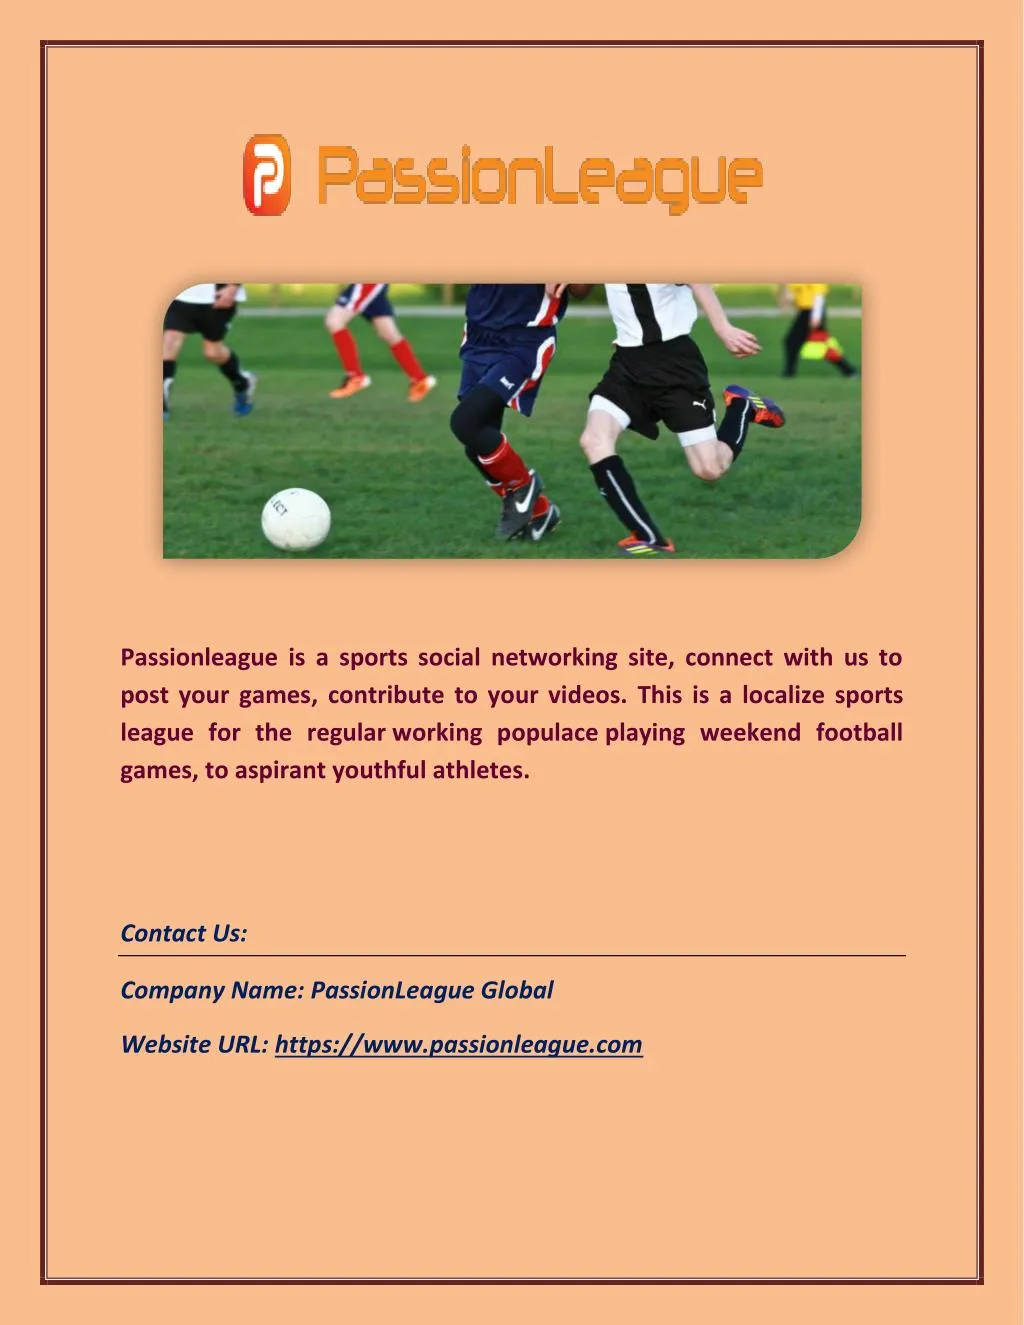 passionleague is a sports social networking site